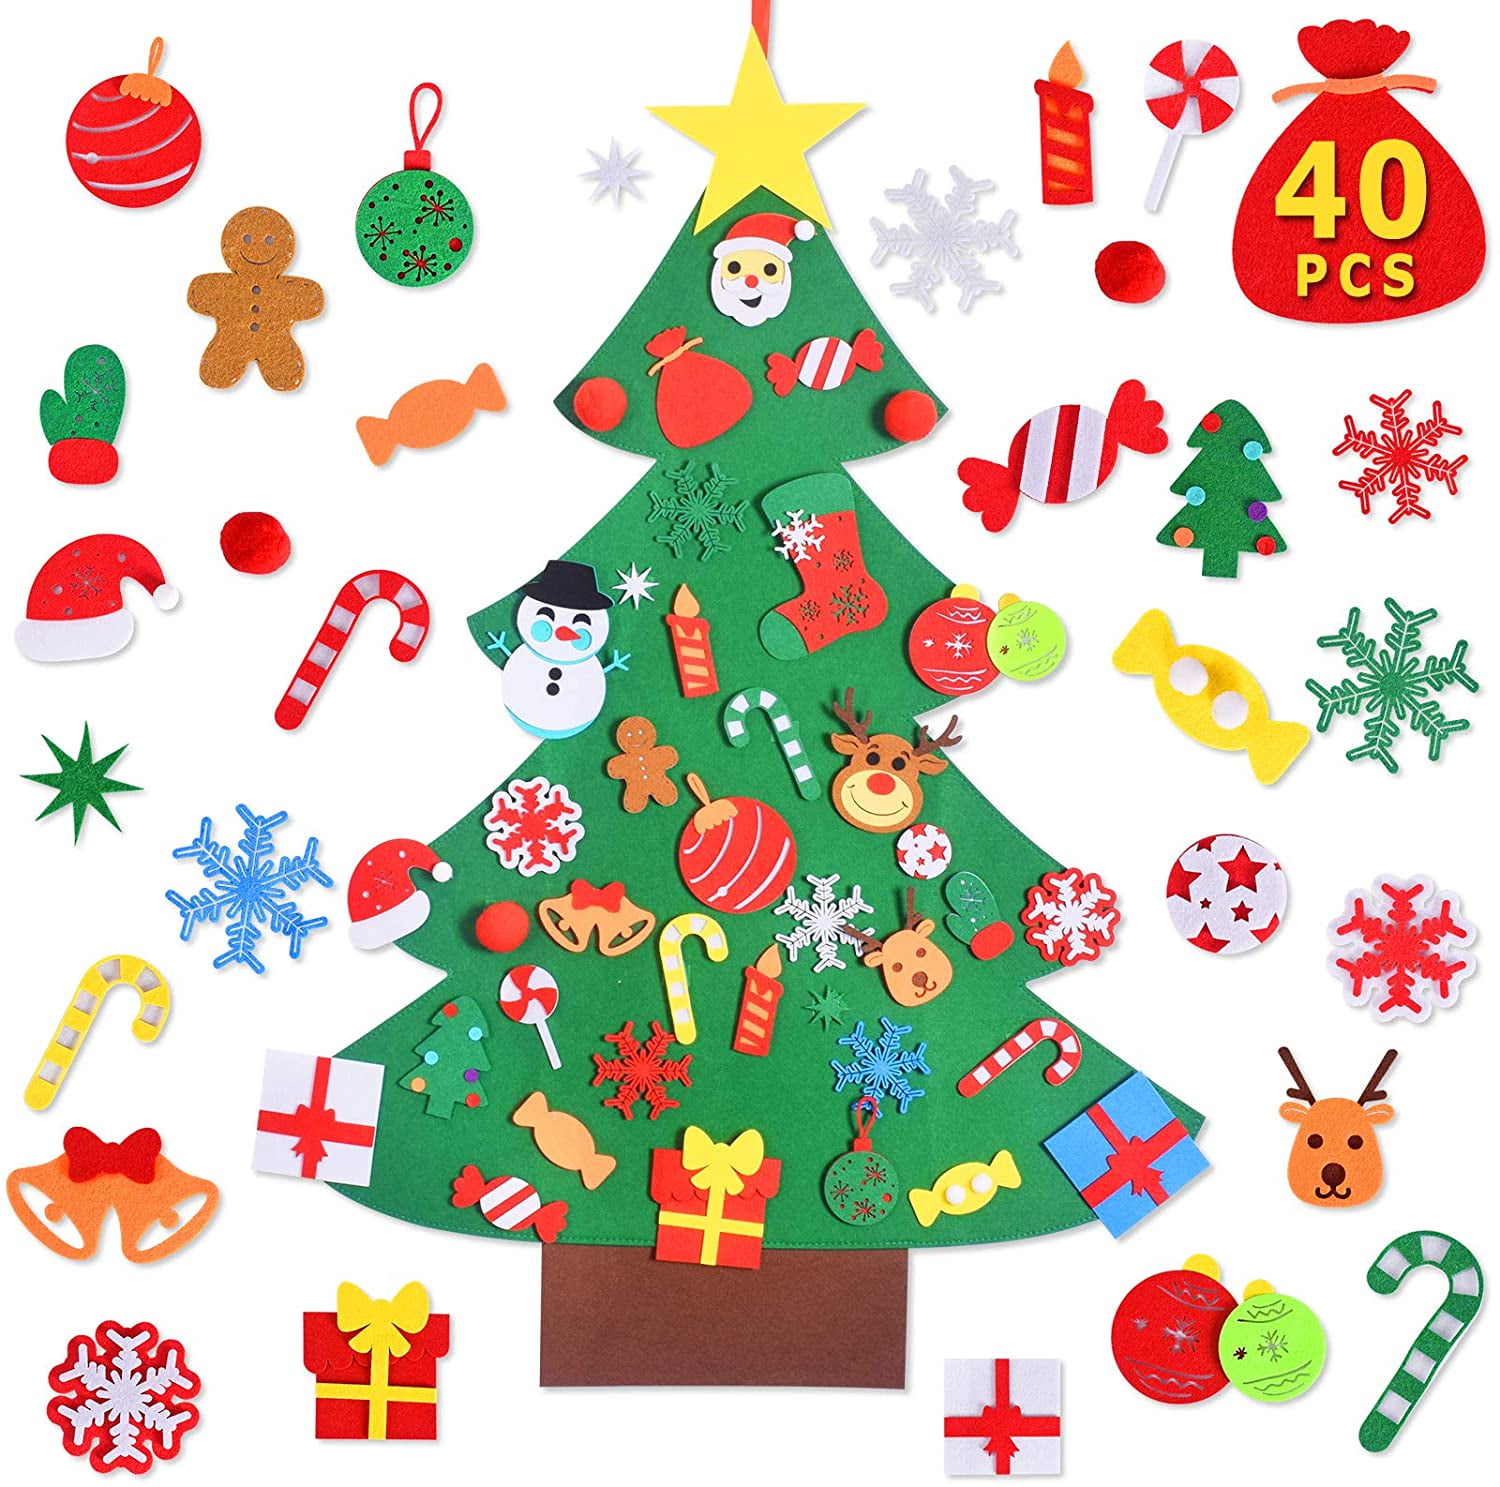 Christmas DIY Tree Hanging Flags Banner Ornament Xmas Gift Home Yard Party Decor 